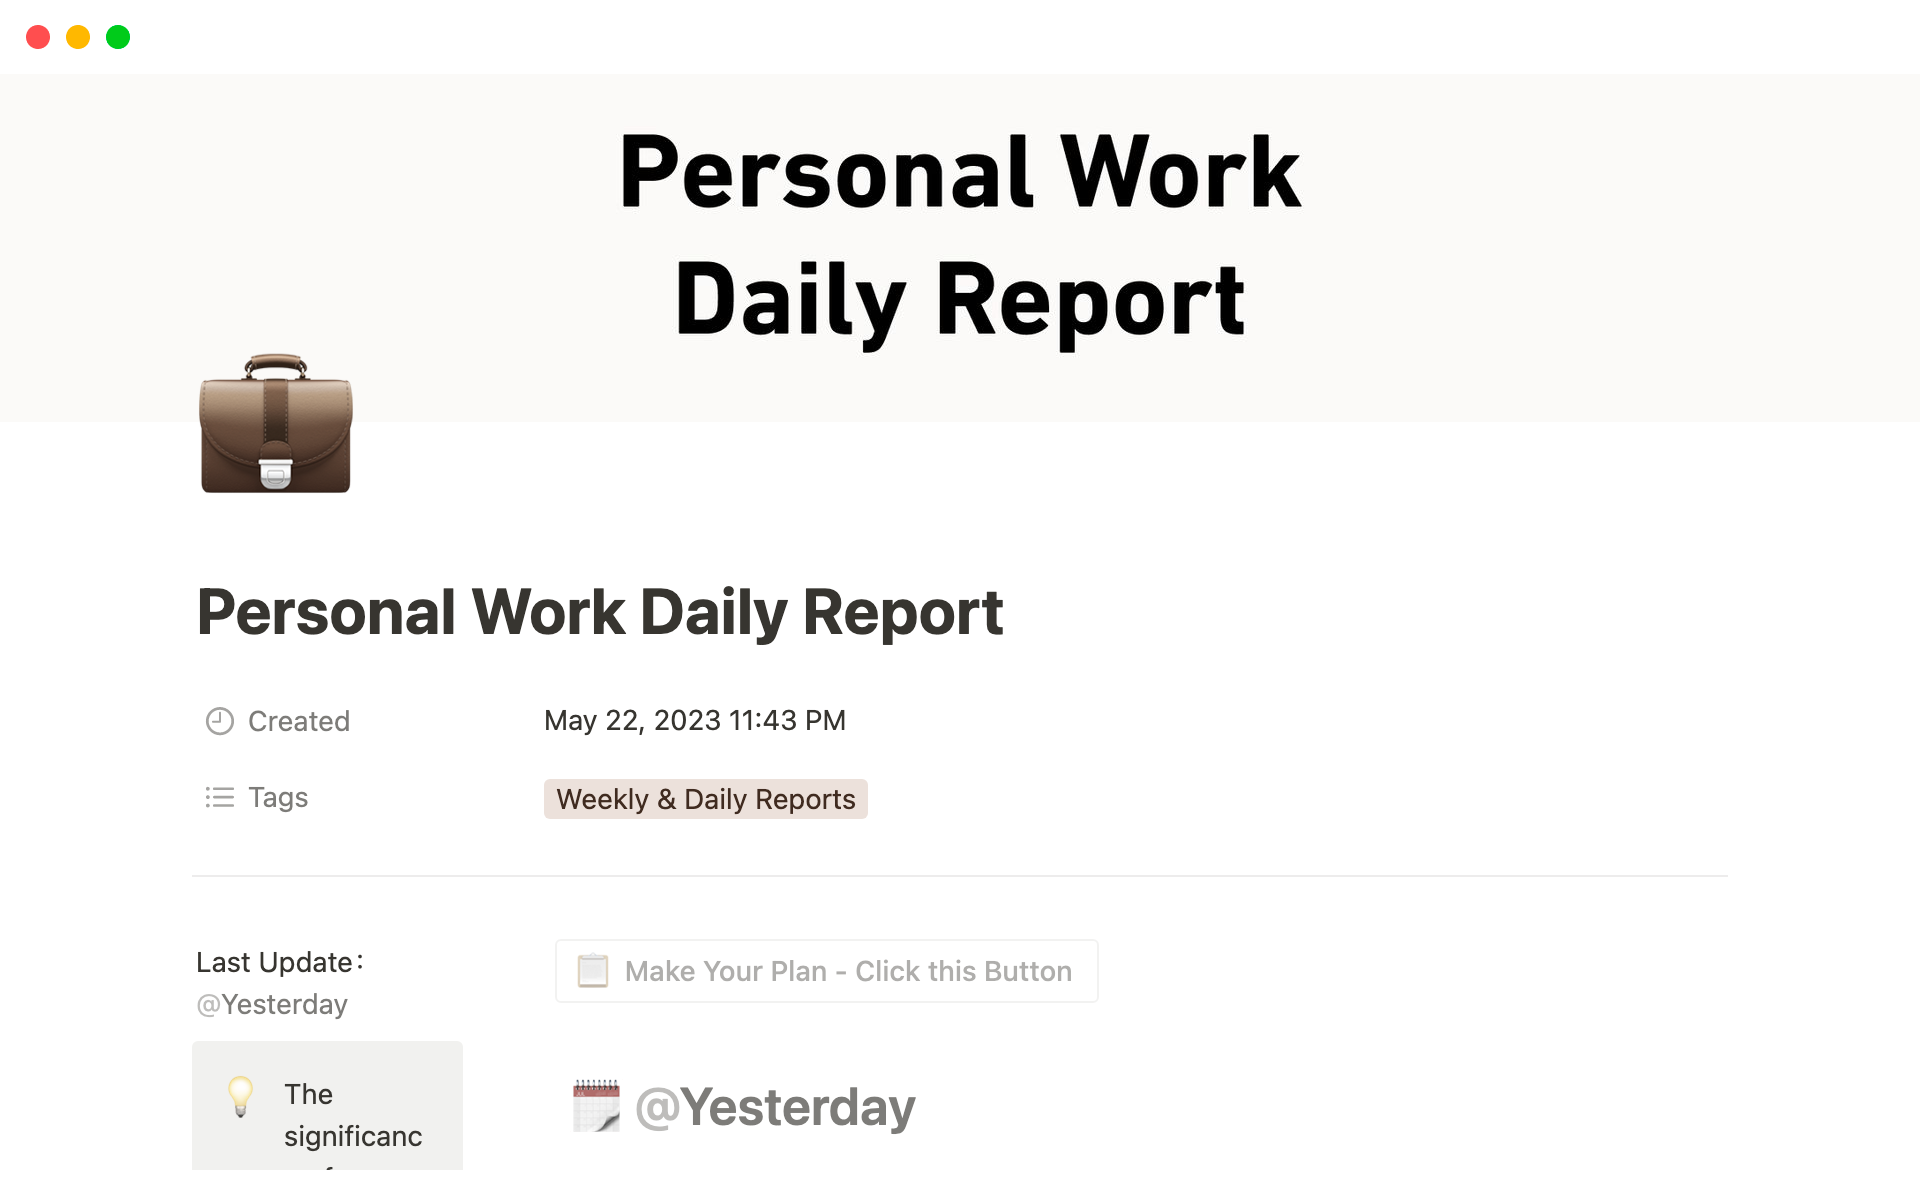 A tool to track, organize, and reflect on daily work activities, fostering productivity and goal attainment.